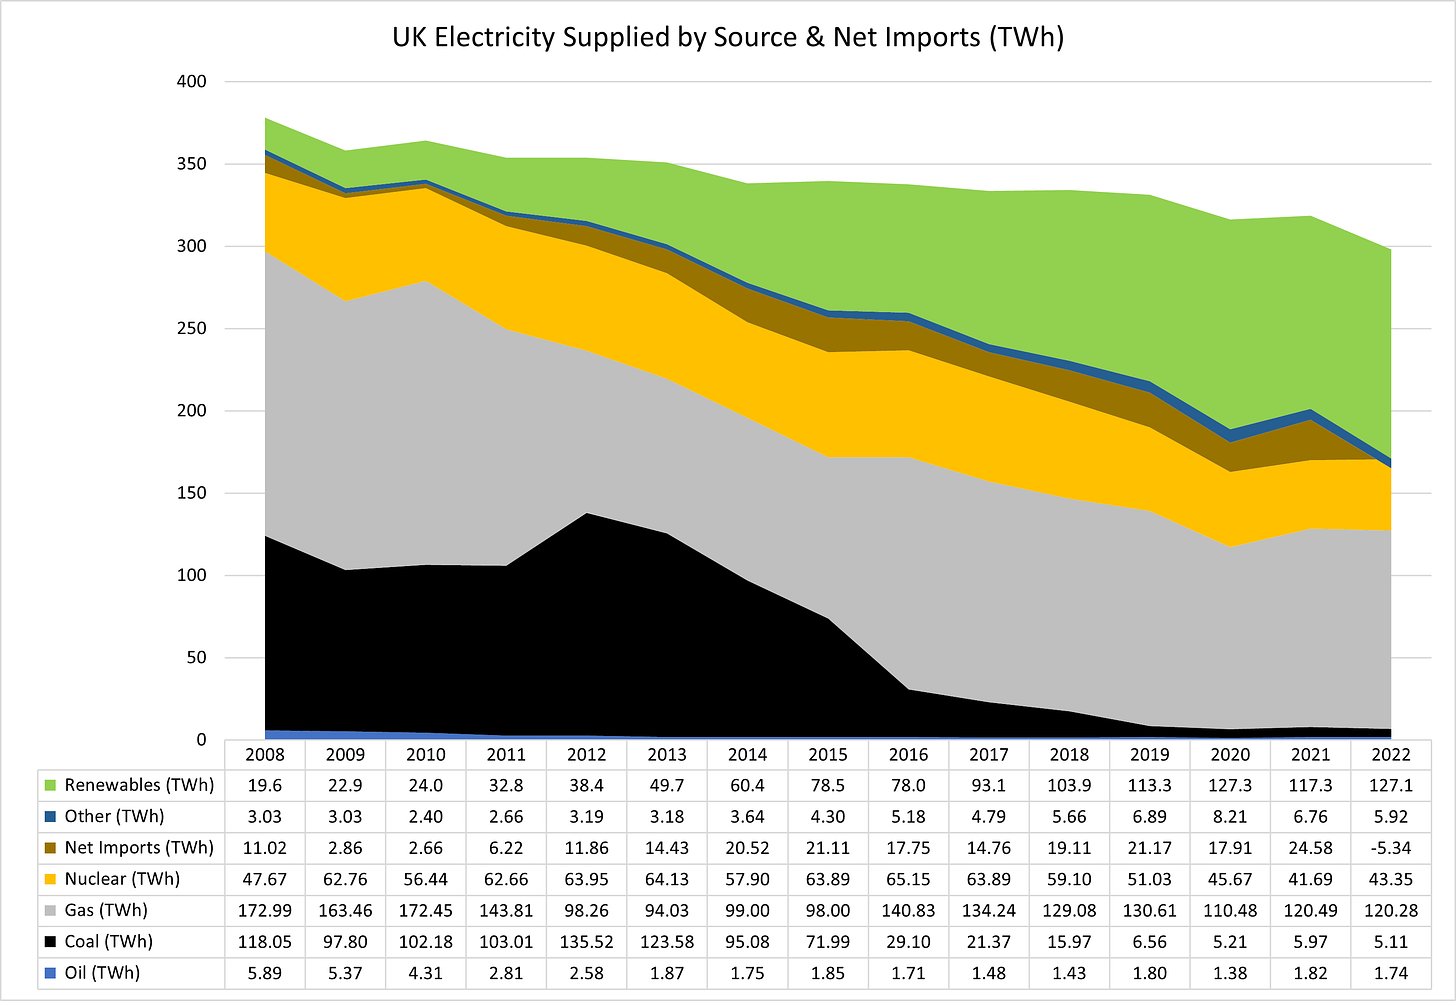 Figure 5 - UK Electricity Supplied by Source and Net Imports (TWh